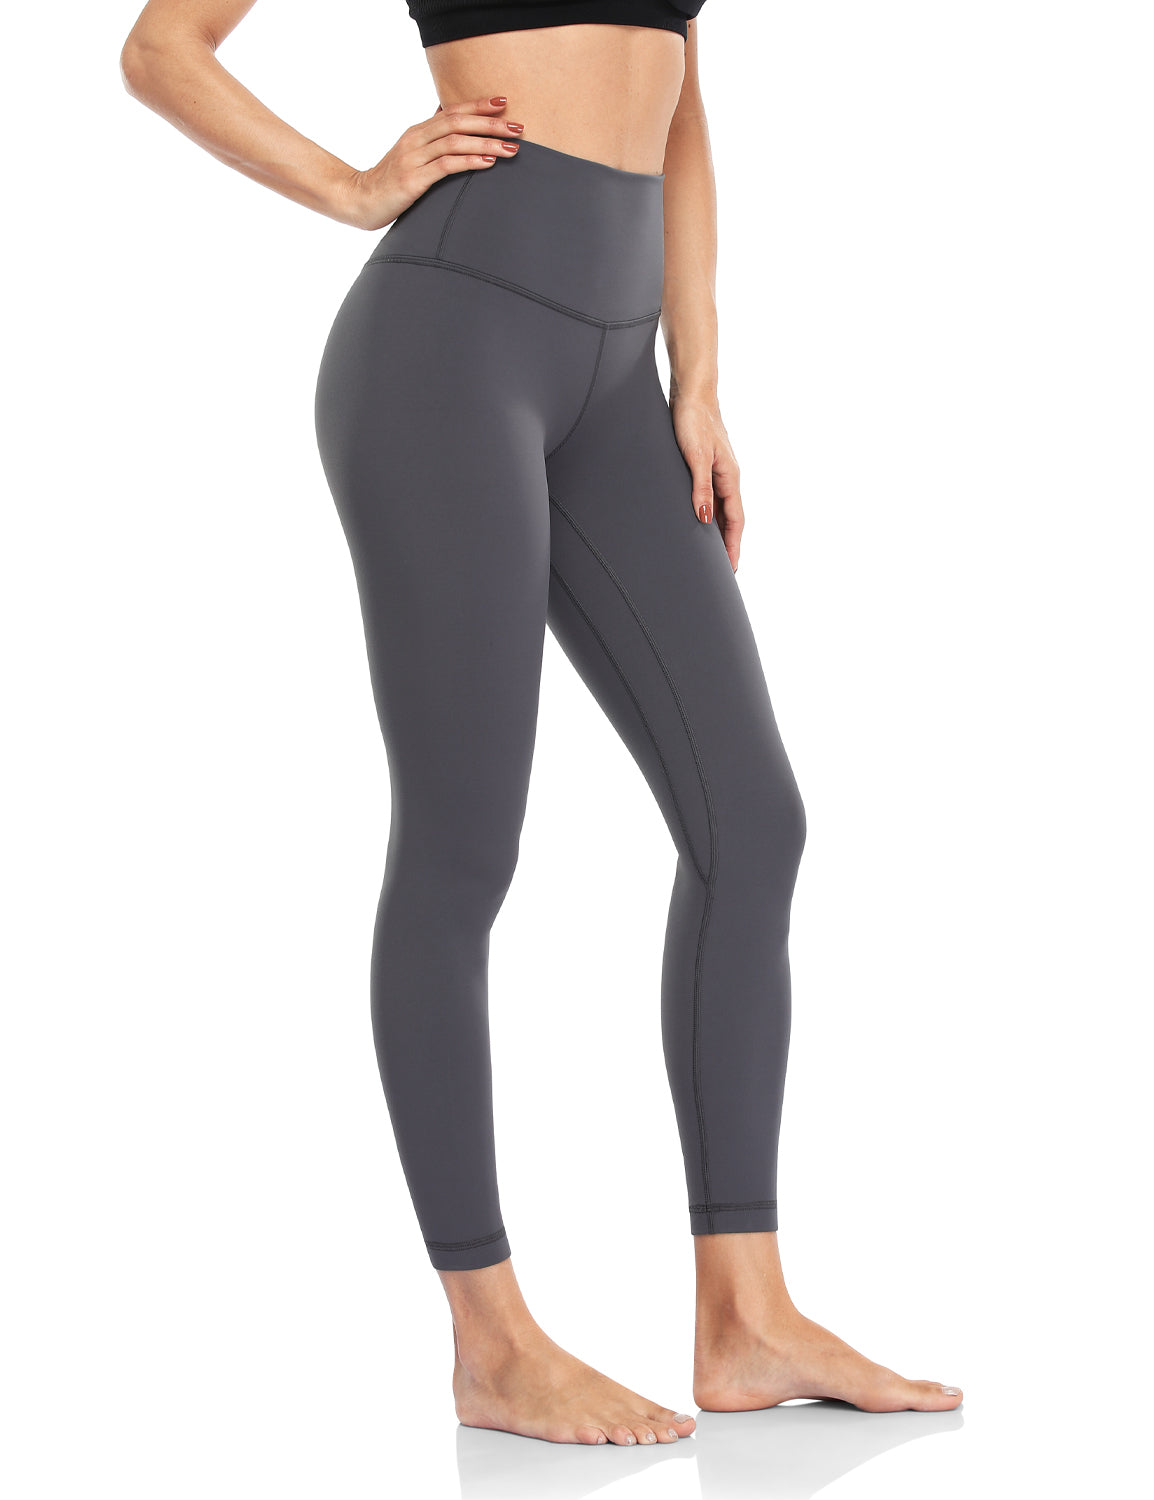 ZUTY 78 Workout Leggings for Women High Waisted Palestine